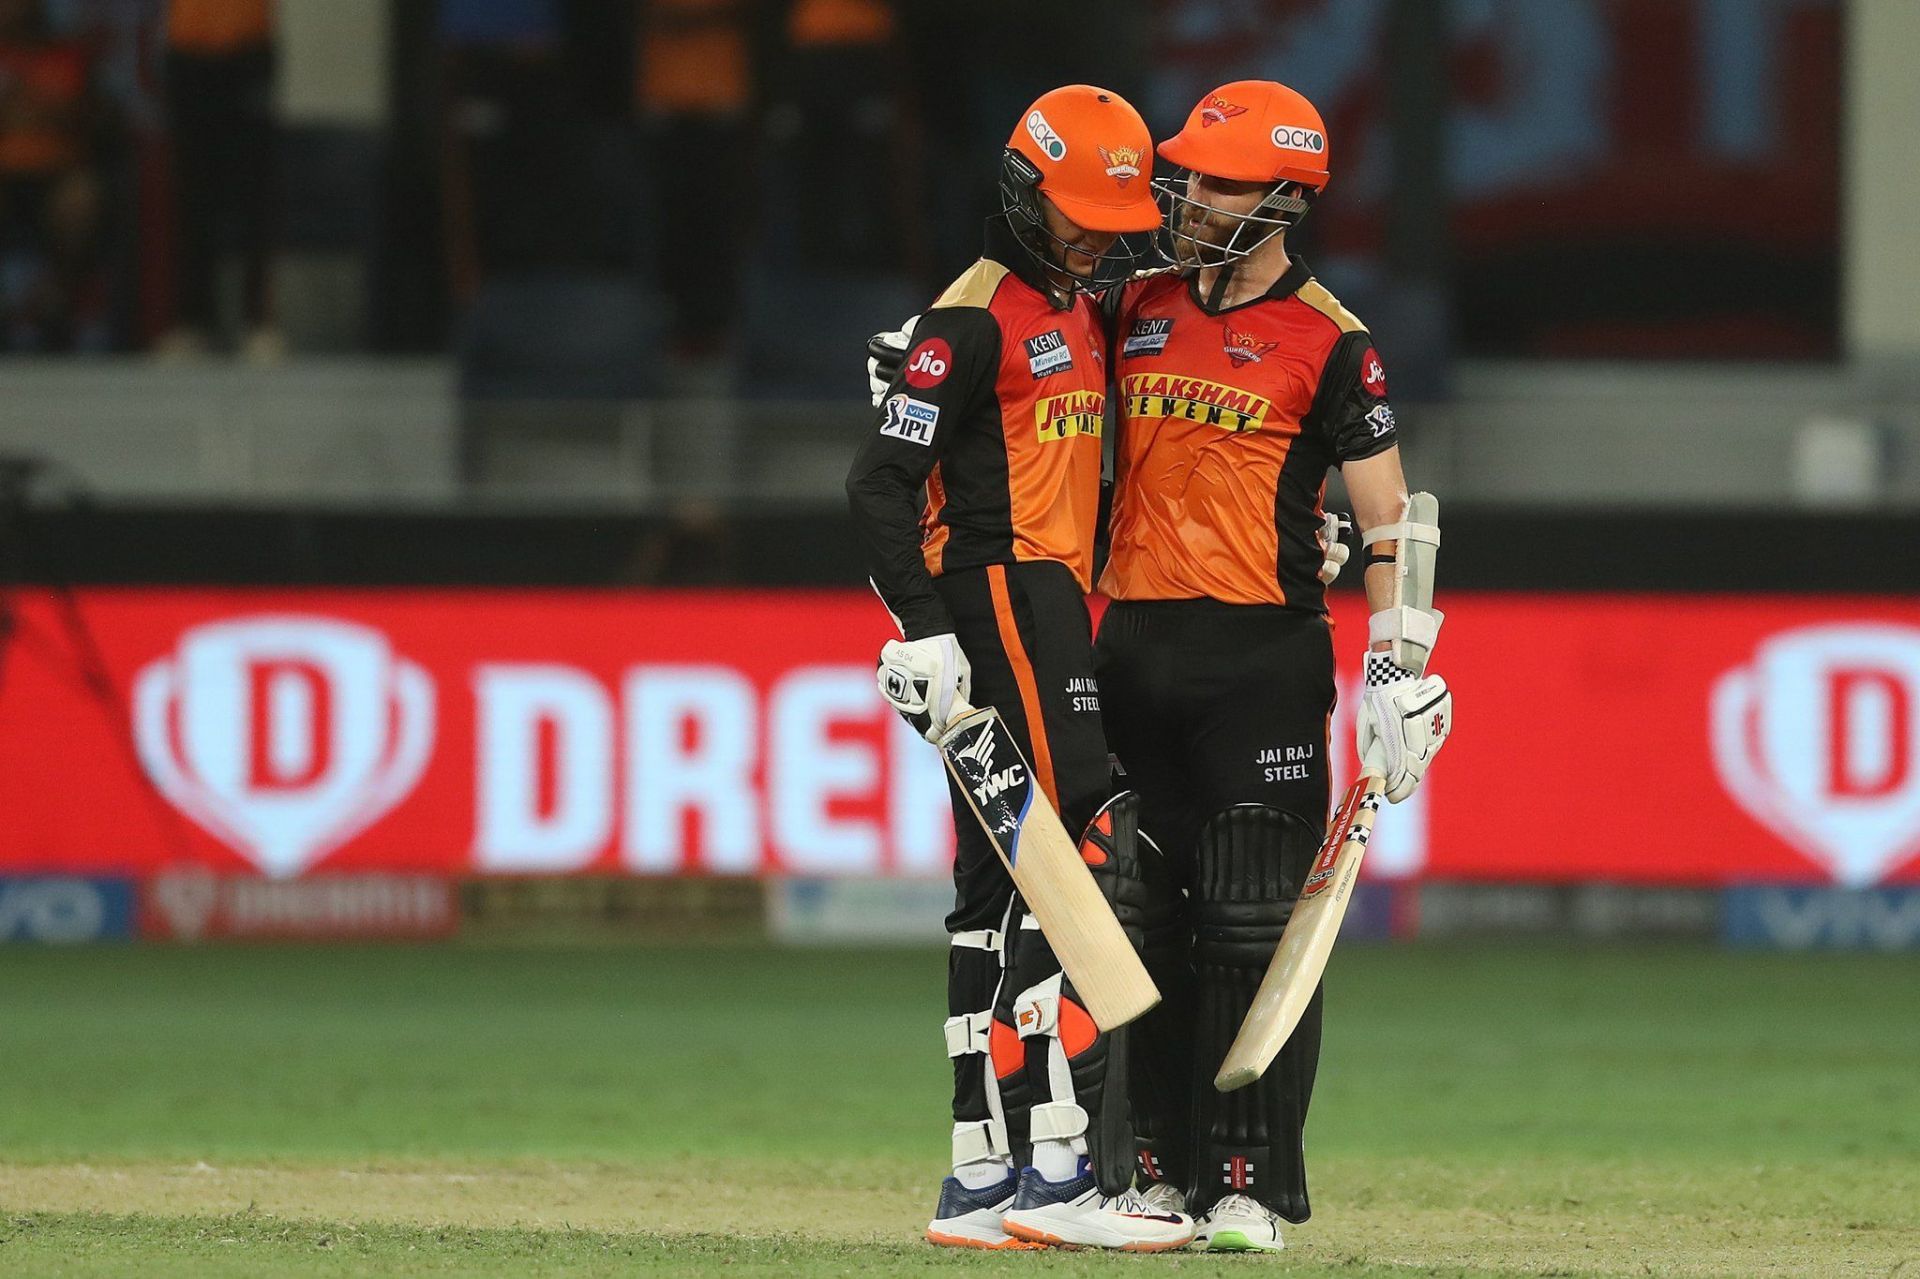 Abhishek Sharma (left) and Kane Williamson (right) are likely to open the batting for SRH this season. Image: IPL